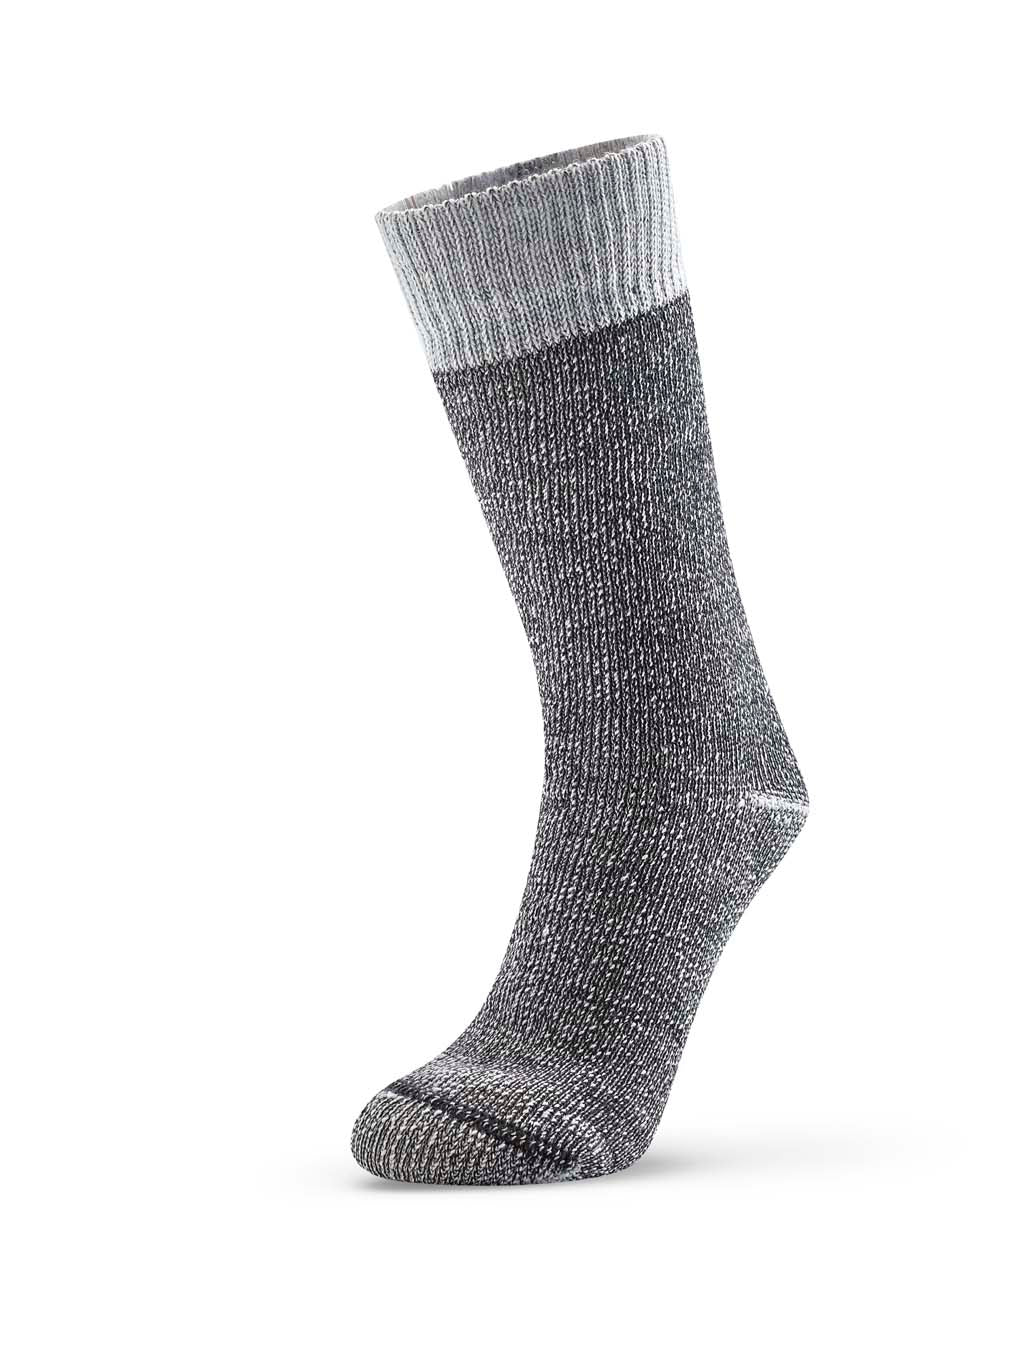 High Country Sock - Charcoal